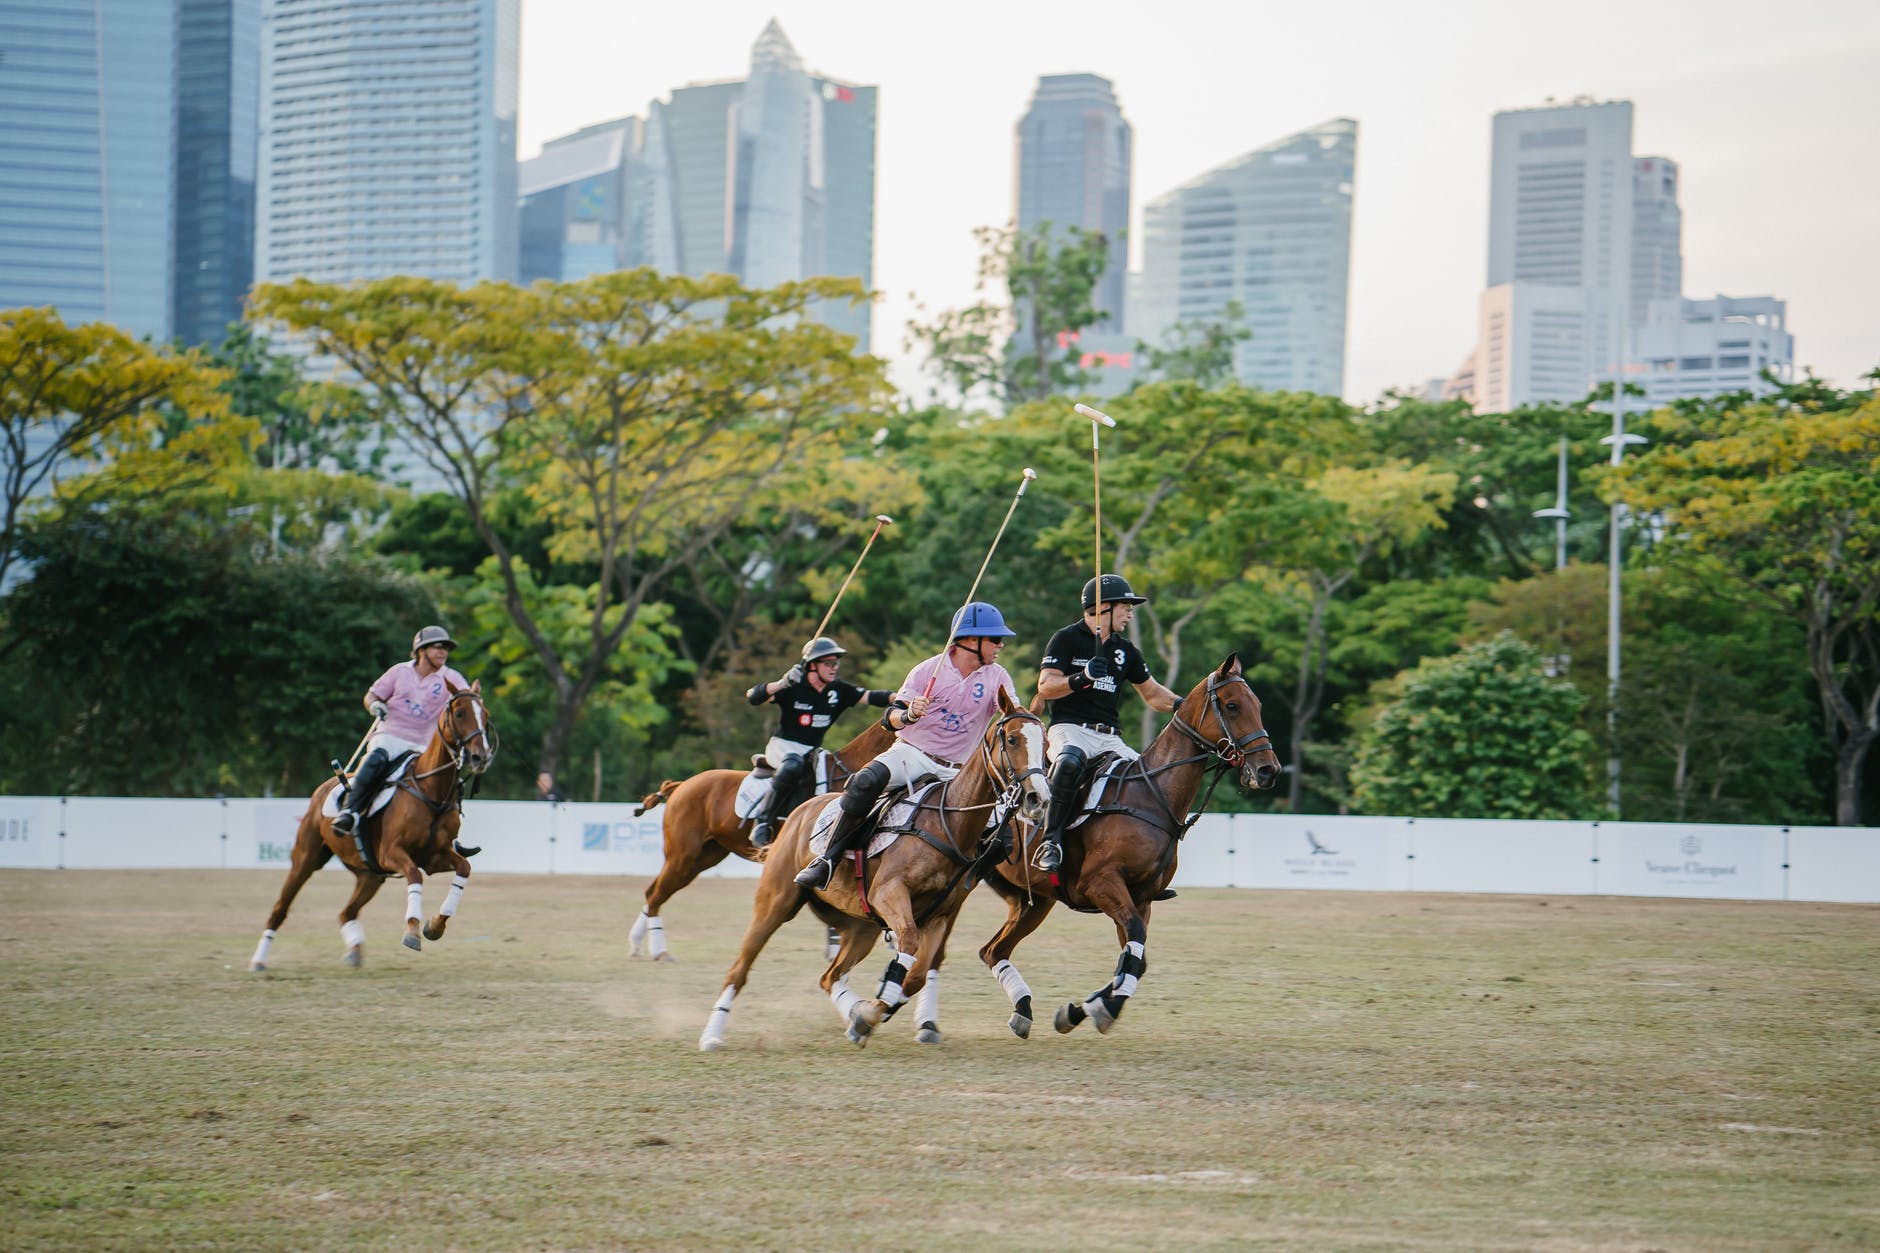 group of men riding horses about to play polo sport